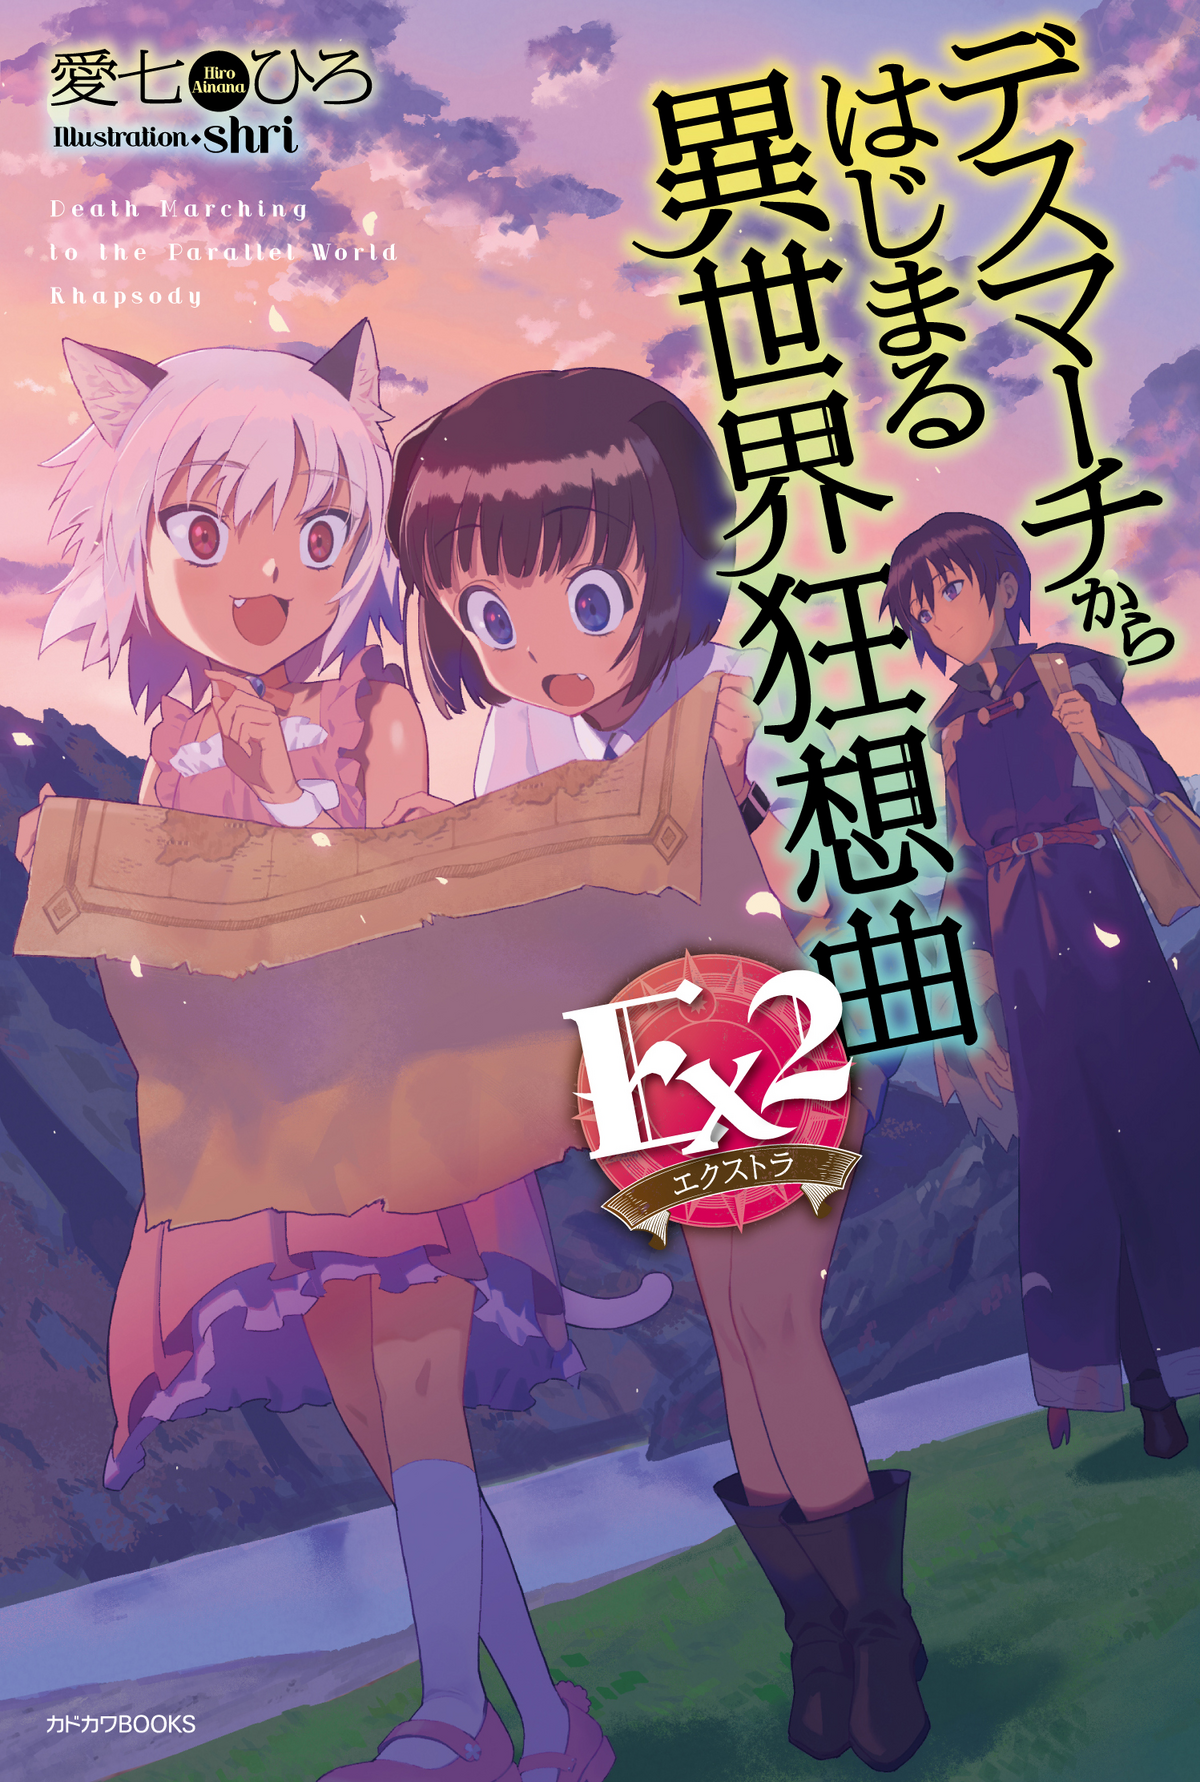 Light Novel Volume 26, Death March to the Parallel World Rhapsody Wiki